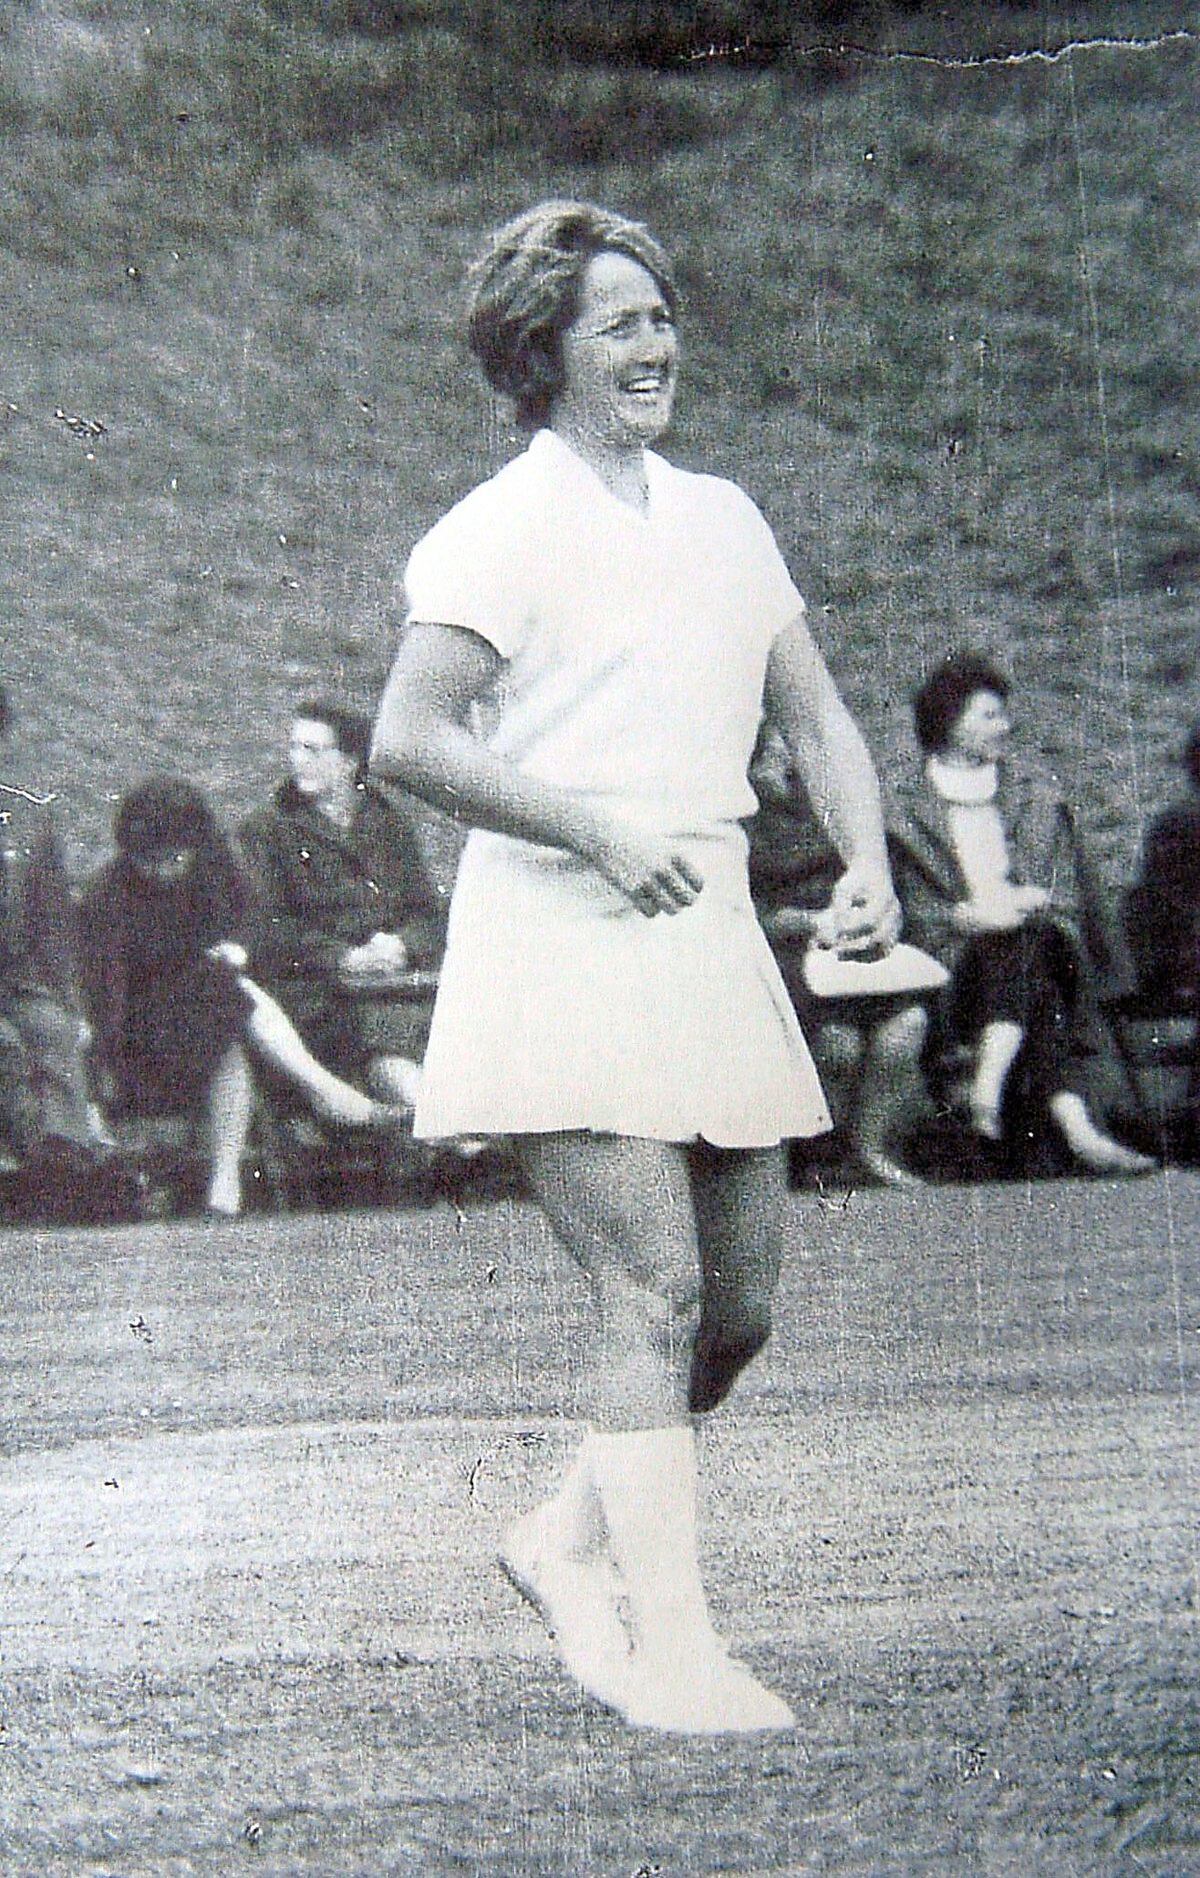 Rachael Heyhoe in her playing days